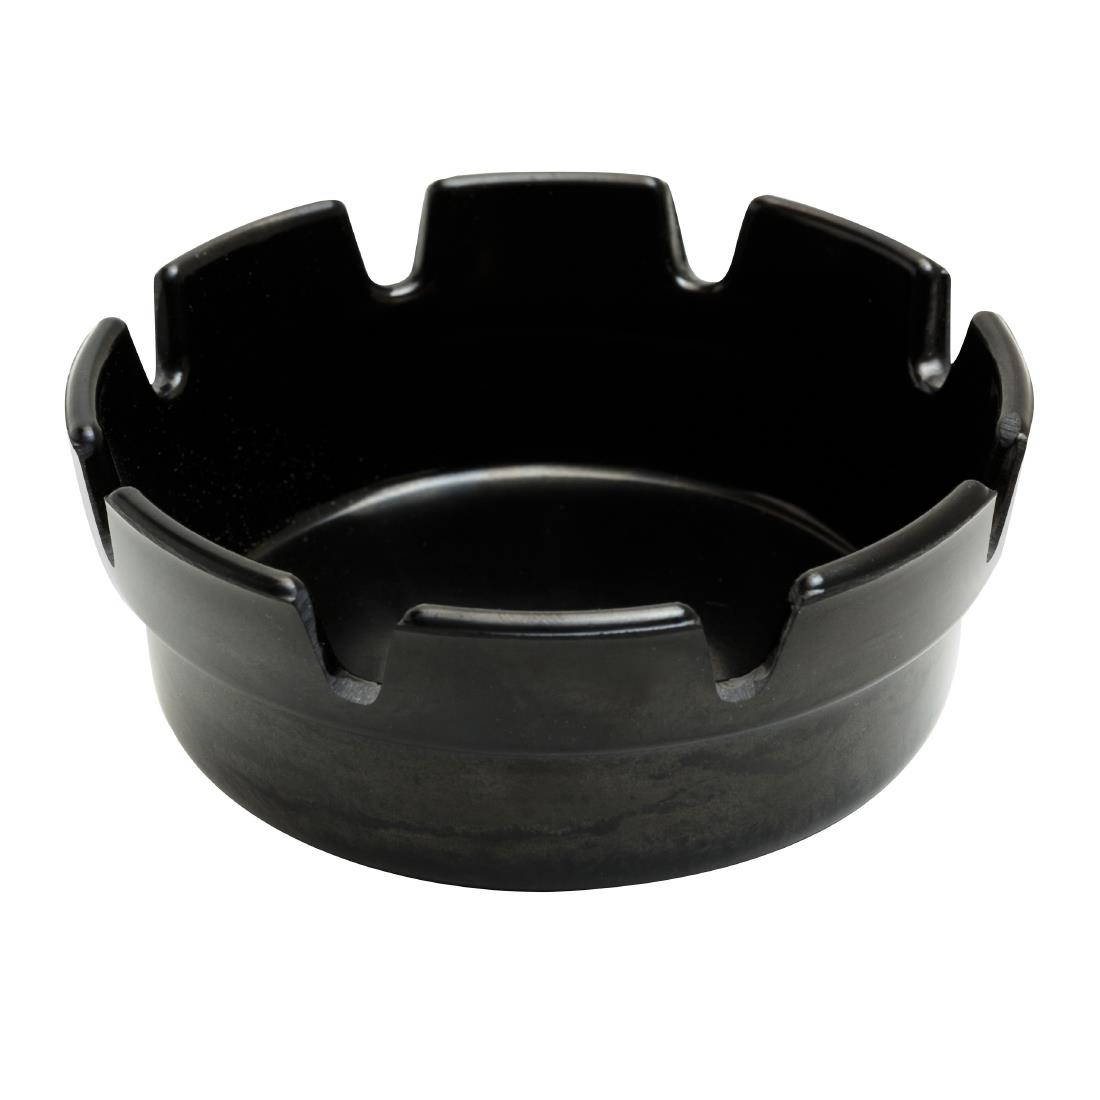 Beaumont Black Bakelite Crown Style Ashtray 101mm Pack of 10 (CZ575)